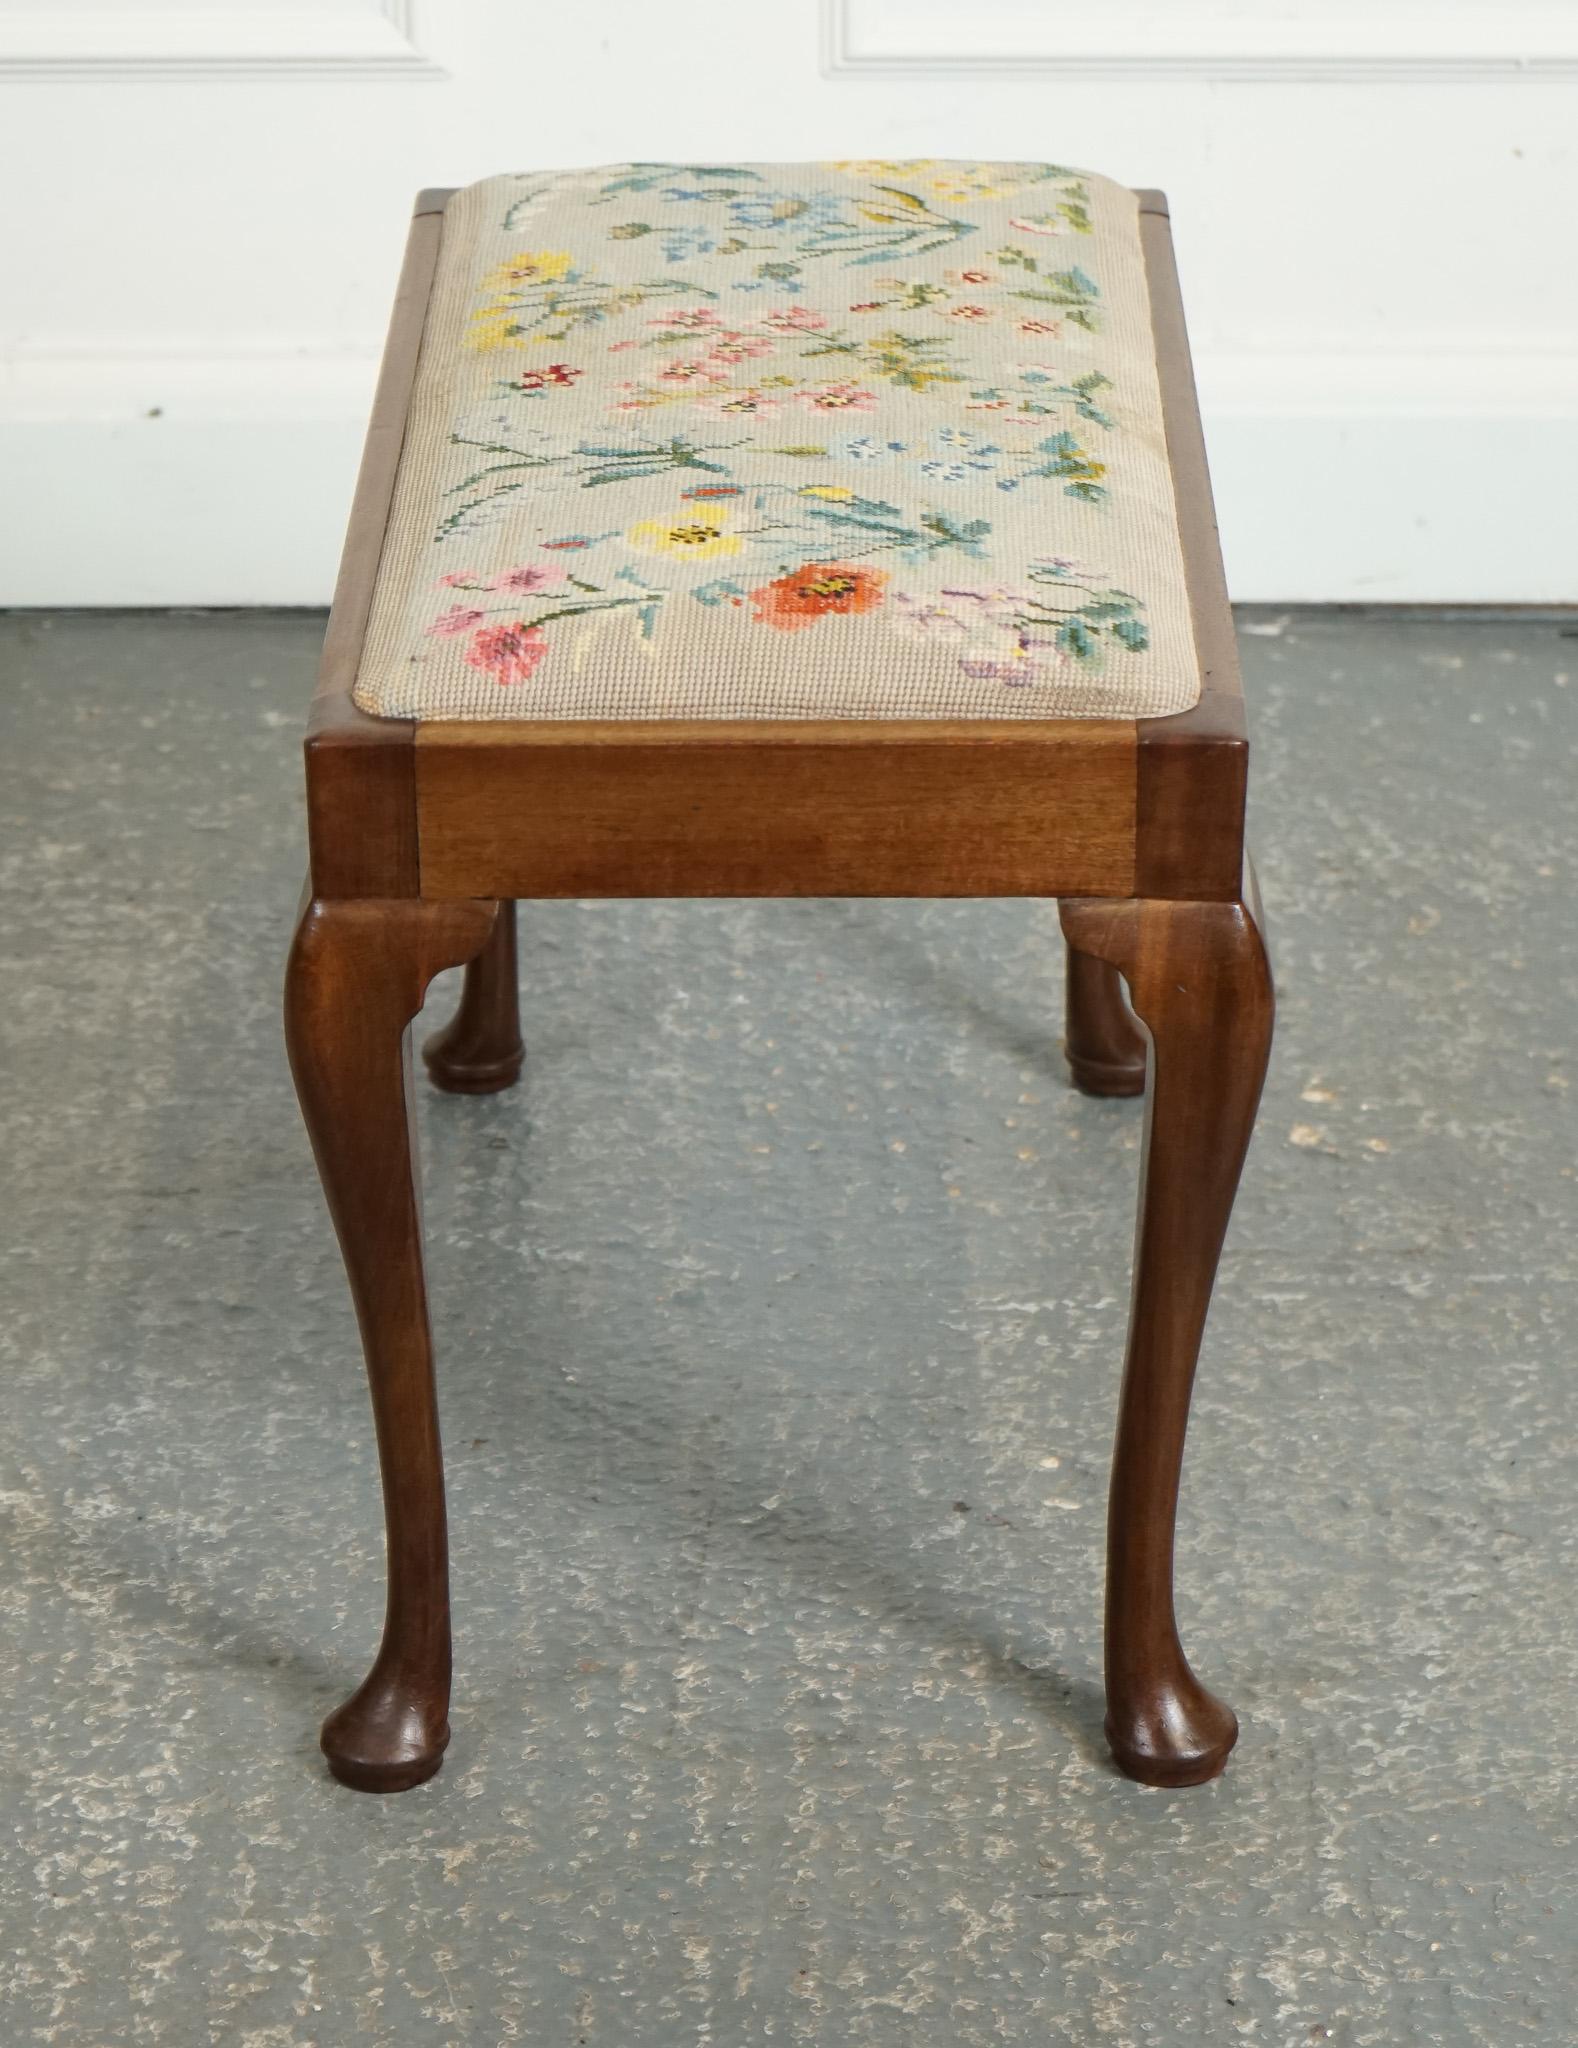 LARGE PIANO DRESSING TABLE STOOL WITH FLOWER STITCHWORK WITH QUEEN ANNE LEGS j1 In Good Condition For Sale In Pulborough, GB